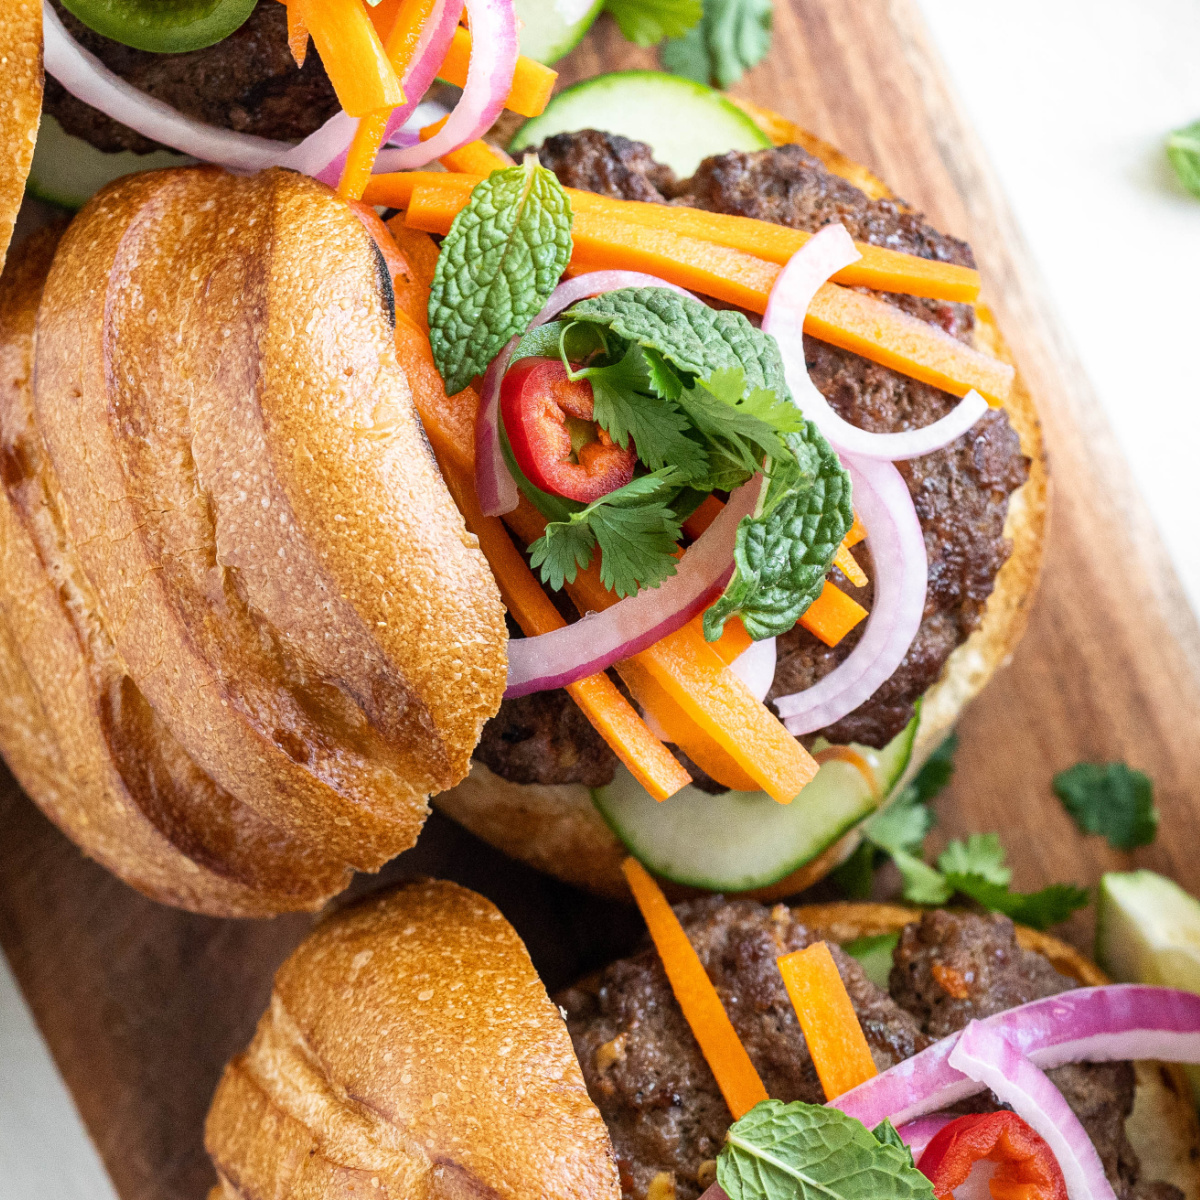 Banh Mi burgers topped with pickled veggies on a wooden board